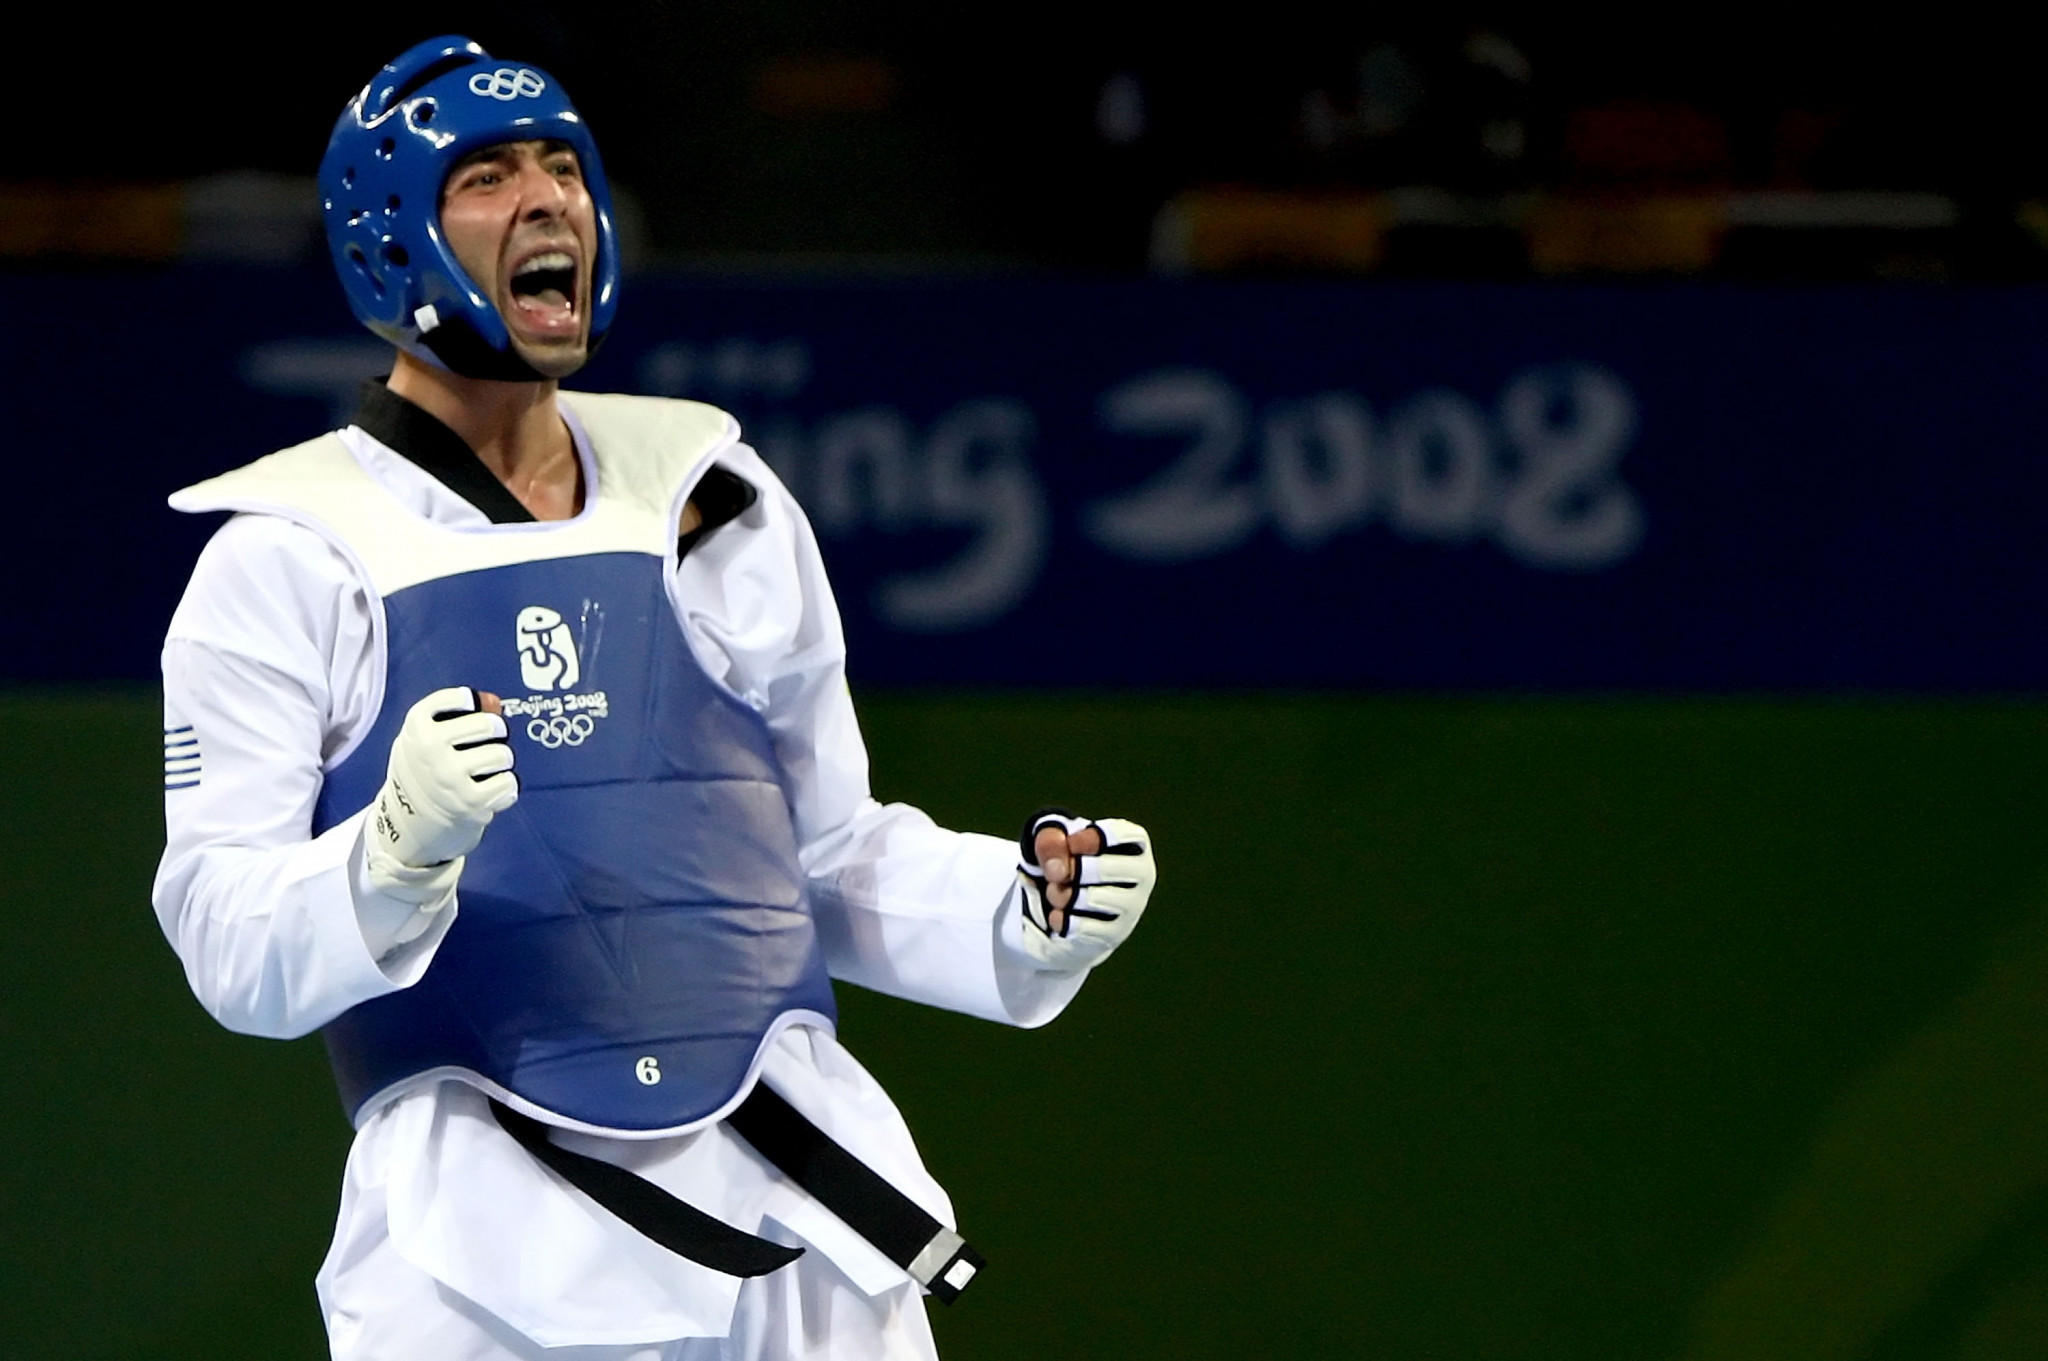 Greek taekwondo star Alexandros Nikolaidis has died aged just 42 after suffering from a rare type of cancer ©Getty Images